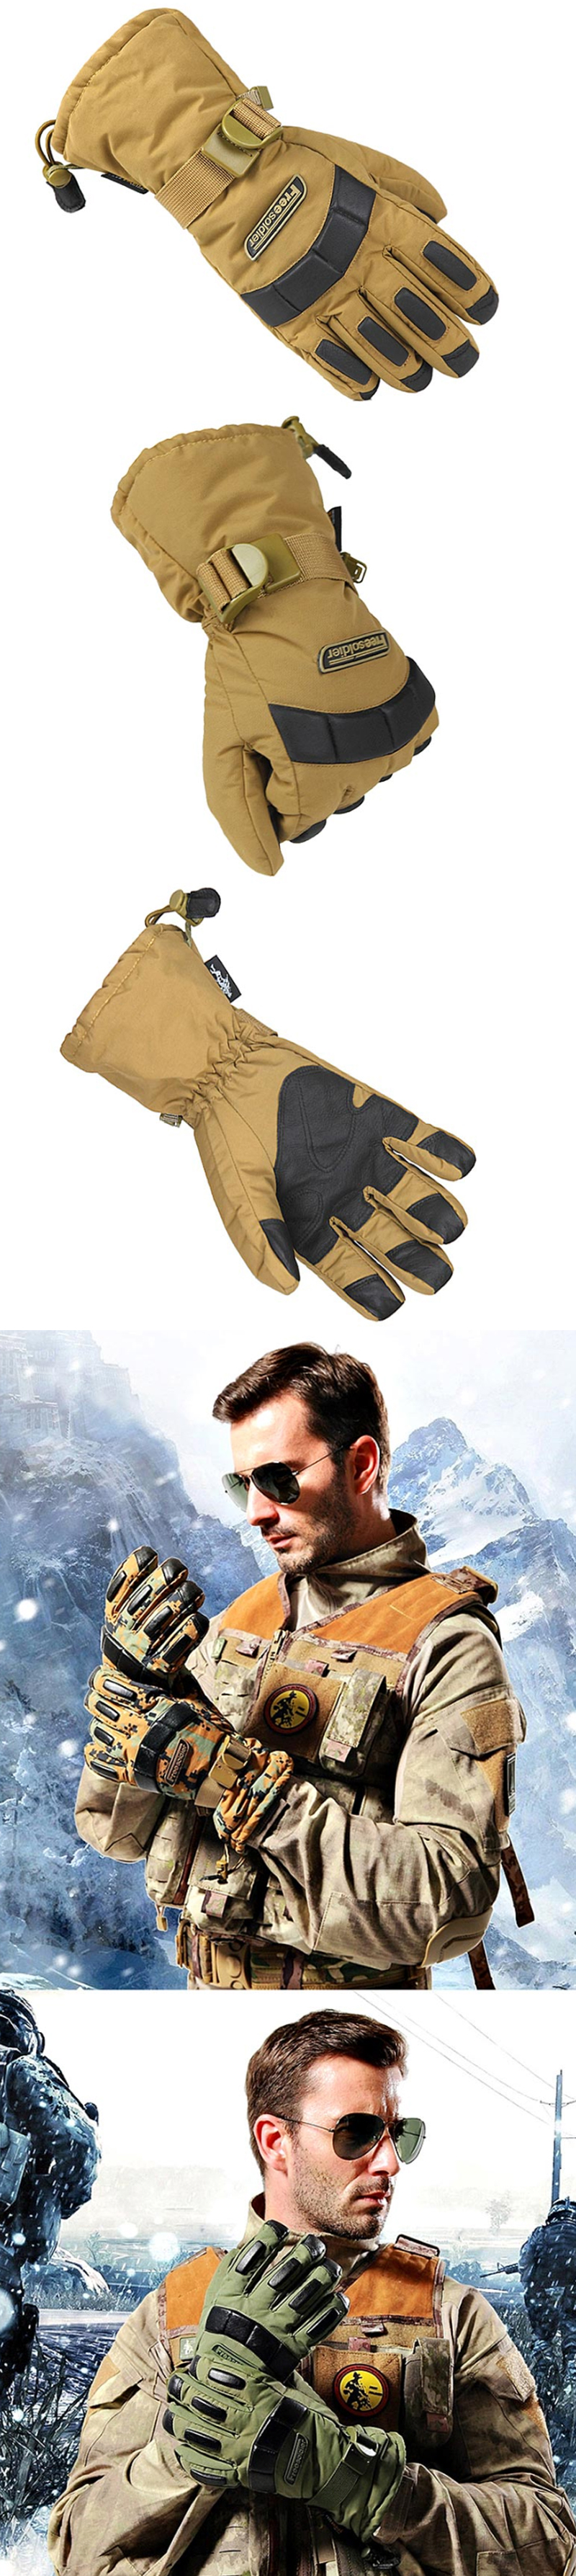 FREE-SOLDIER-Tactical-Gloves-Full-Finger-Glove-Outdoor-Hunting-Sport-Cycling-Slip-Resistant-Gloves-1444545-3